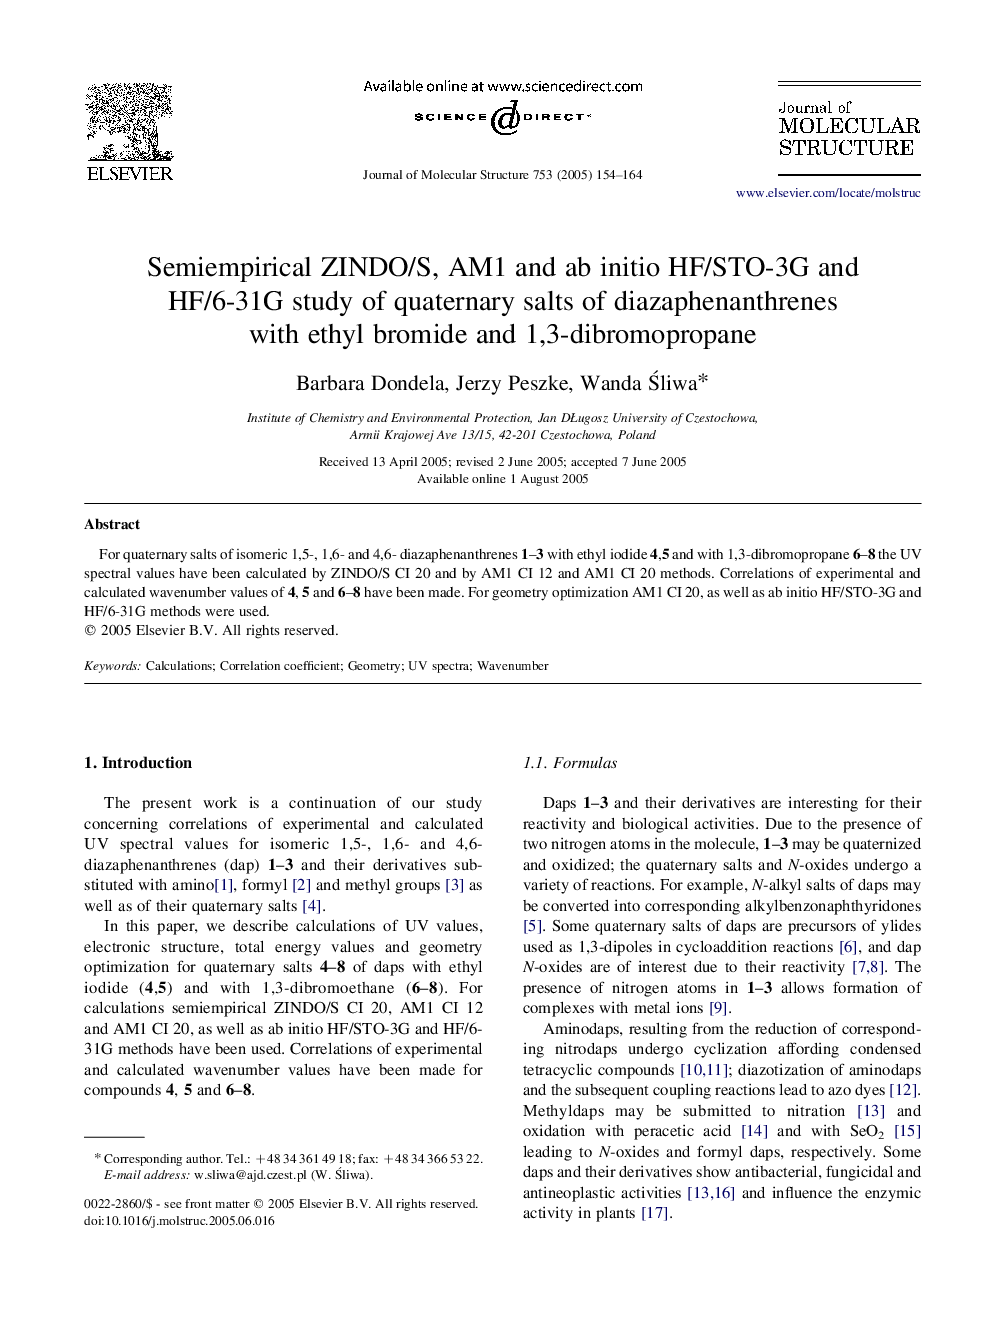 Semiempirical ZINDO/S, AM1 and ab initio HF/STO-3G and HF/6-31G study of quaternary salts of diazaphenanthrenes with ethyl bromide and 1,3-dibromopropane